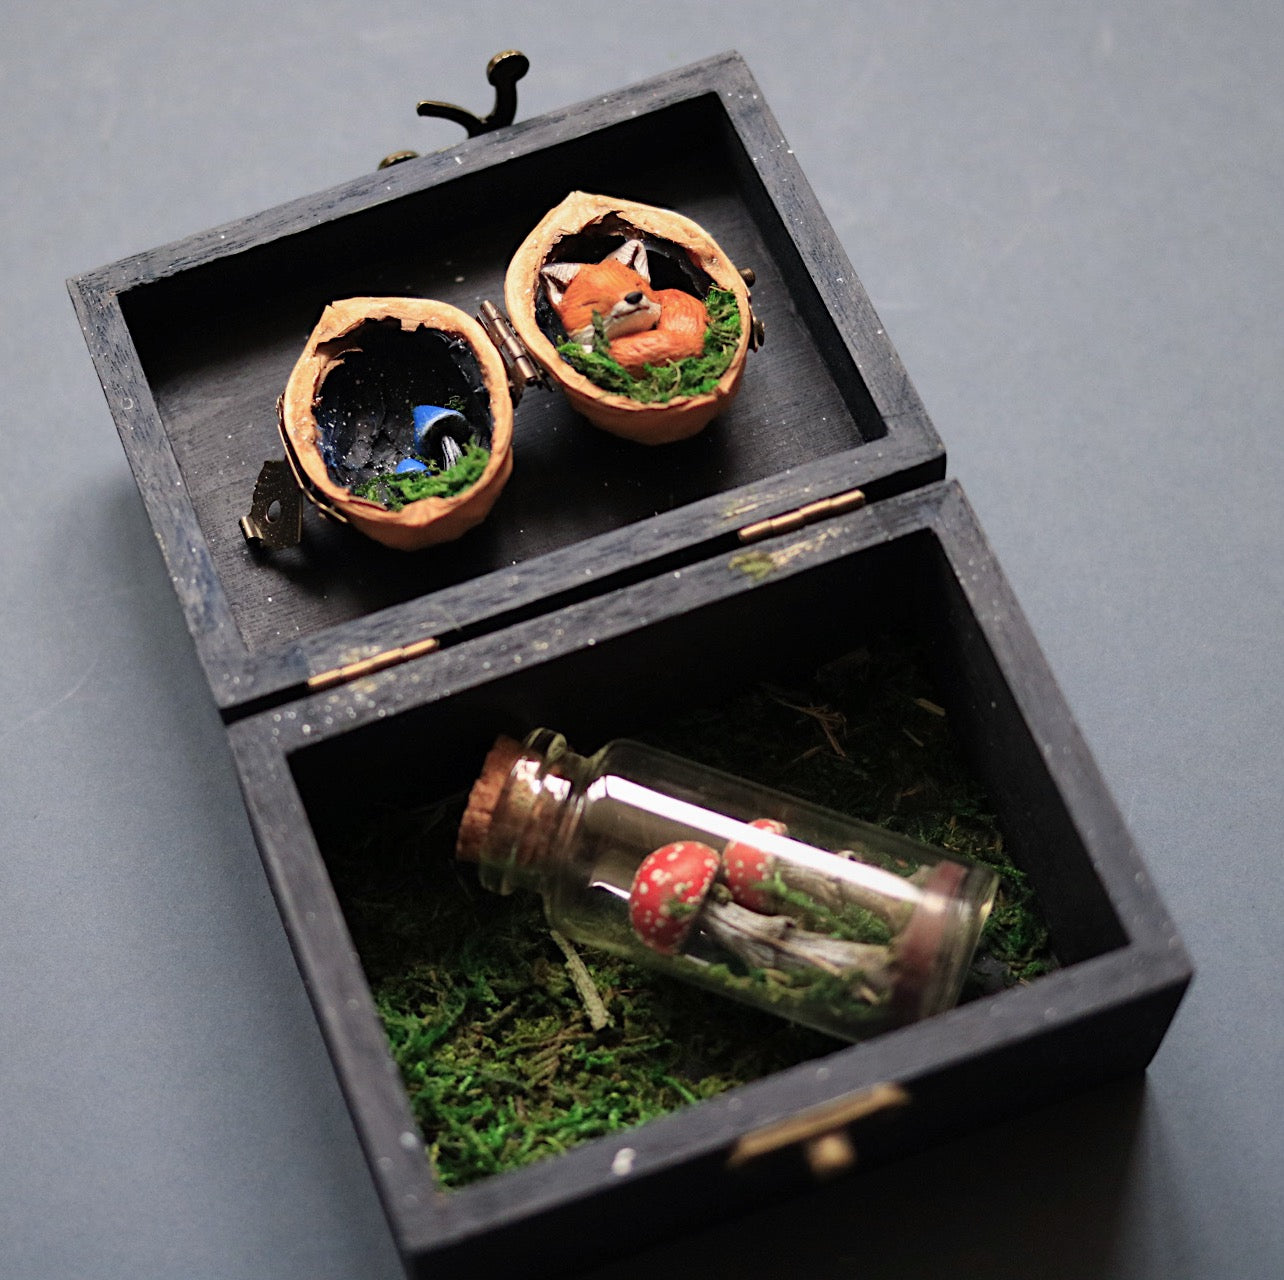 Enchanted Forest Box